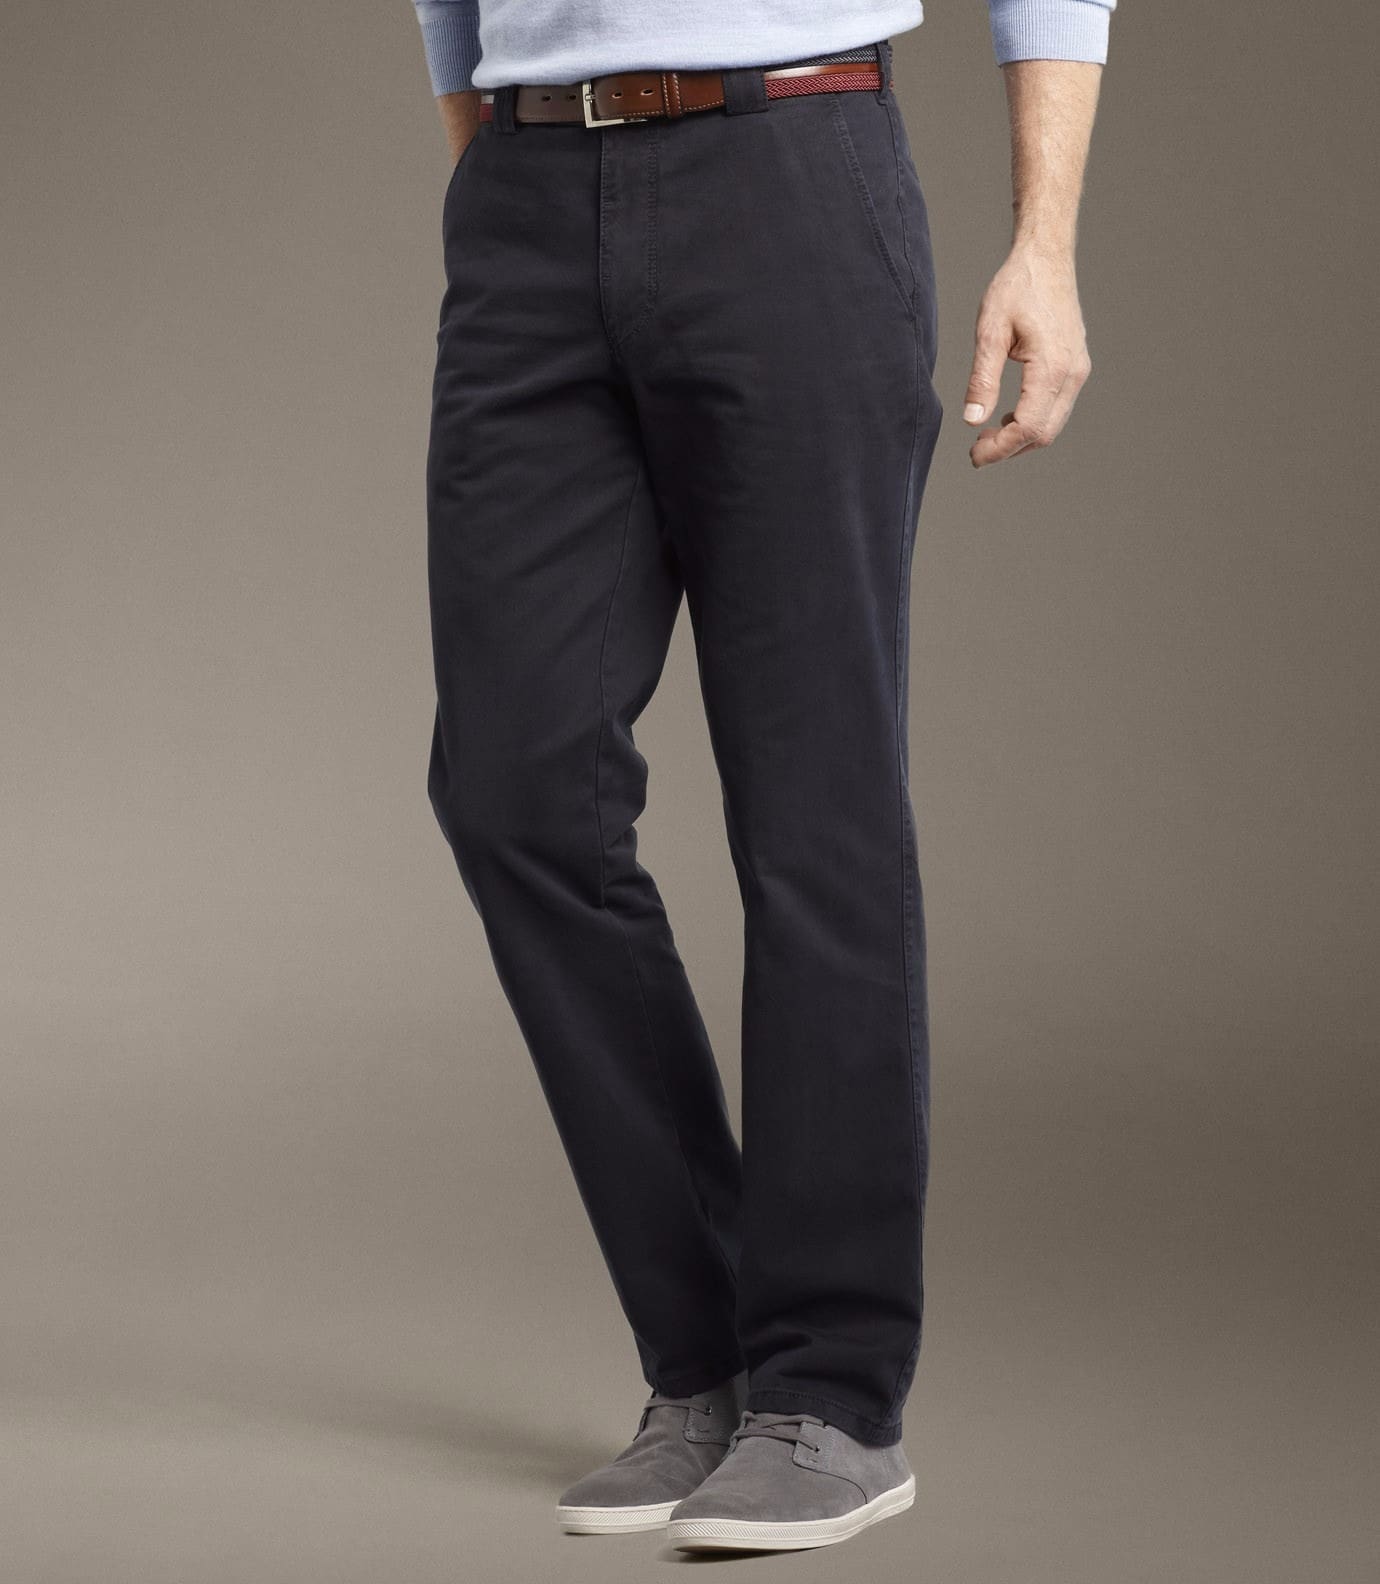 Meyer trousers Roma 316 navy cotton stretch trousers